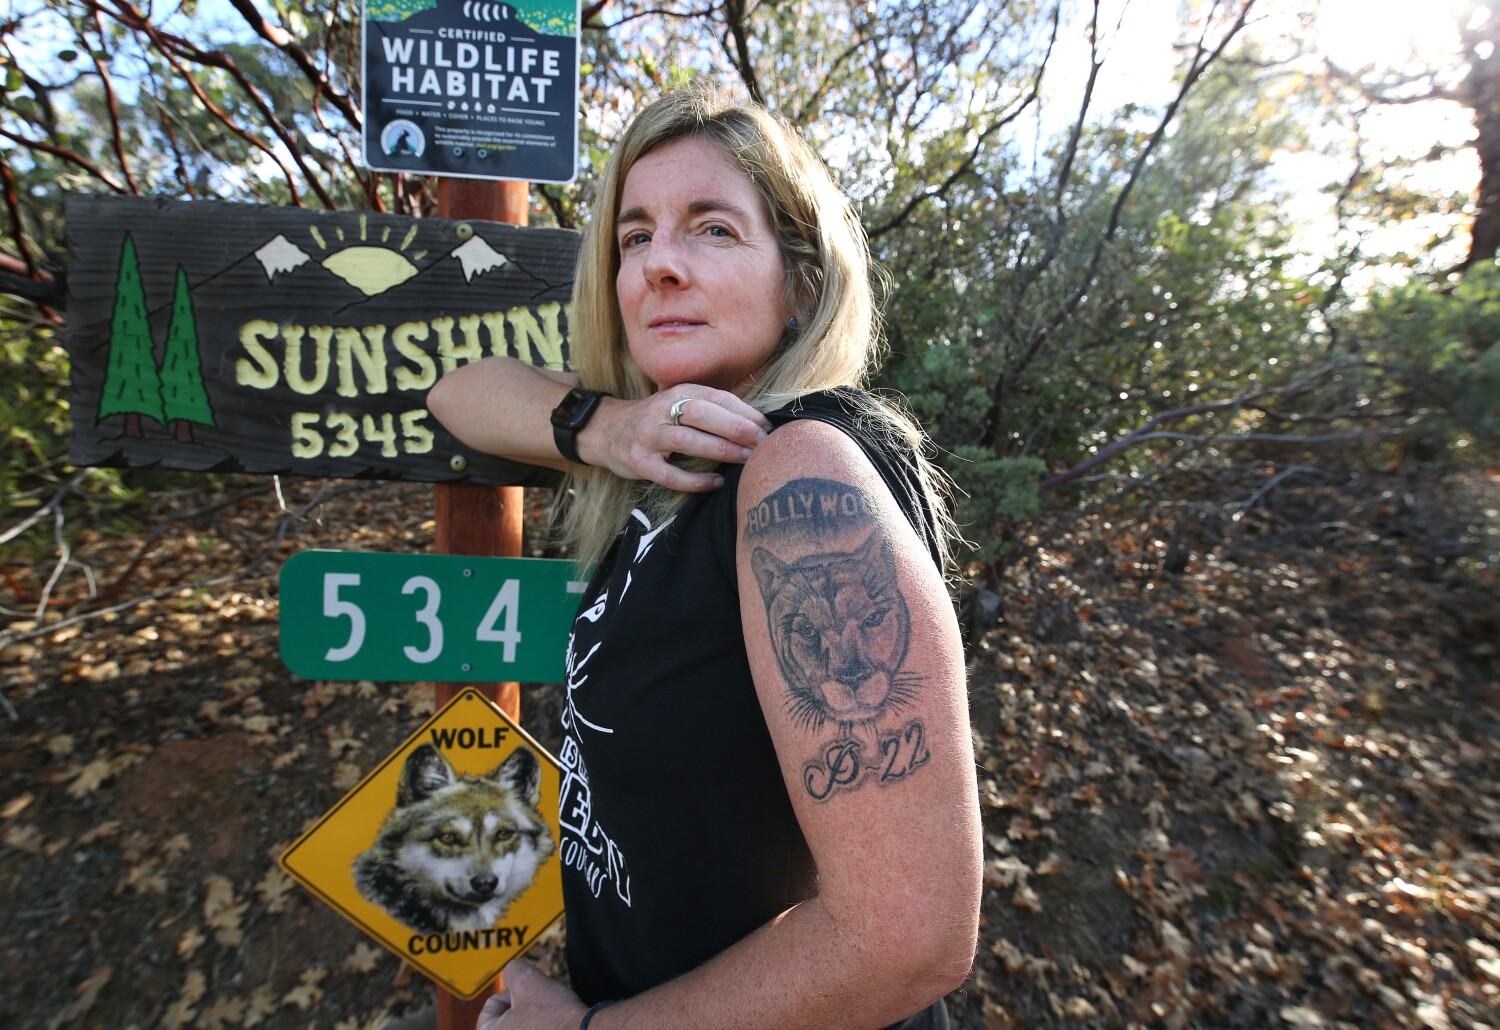 Mission accomplished: Beth Pratt raised millions for a freeway overpass for L.A. cougars